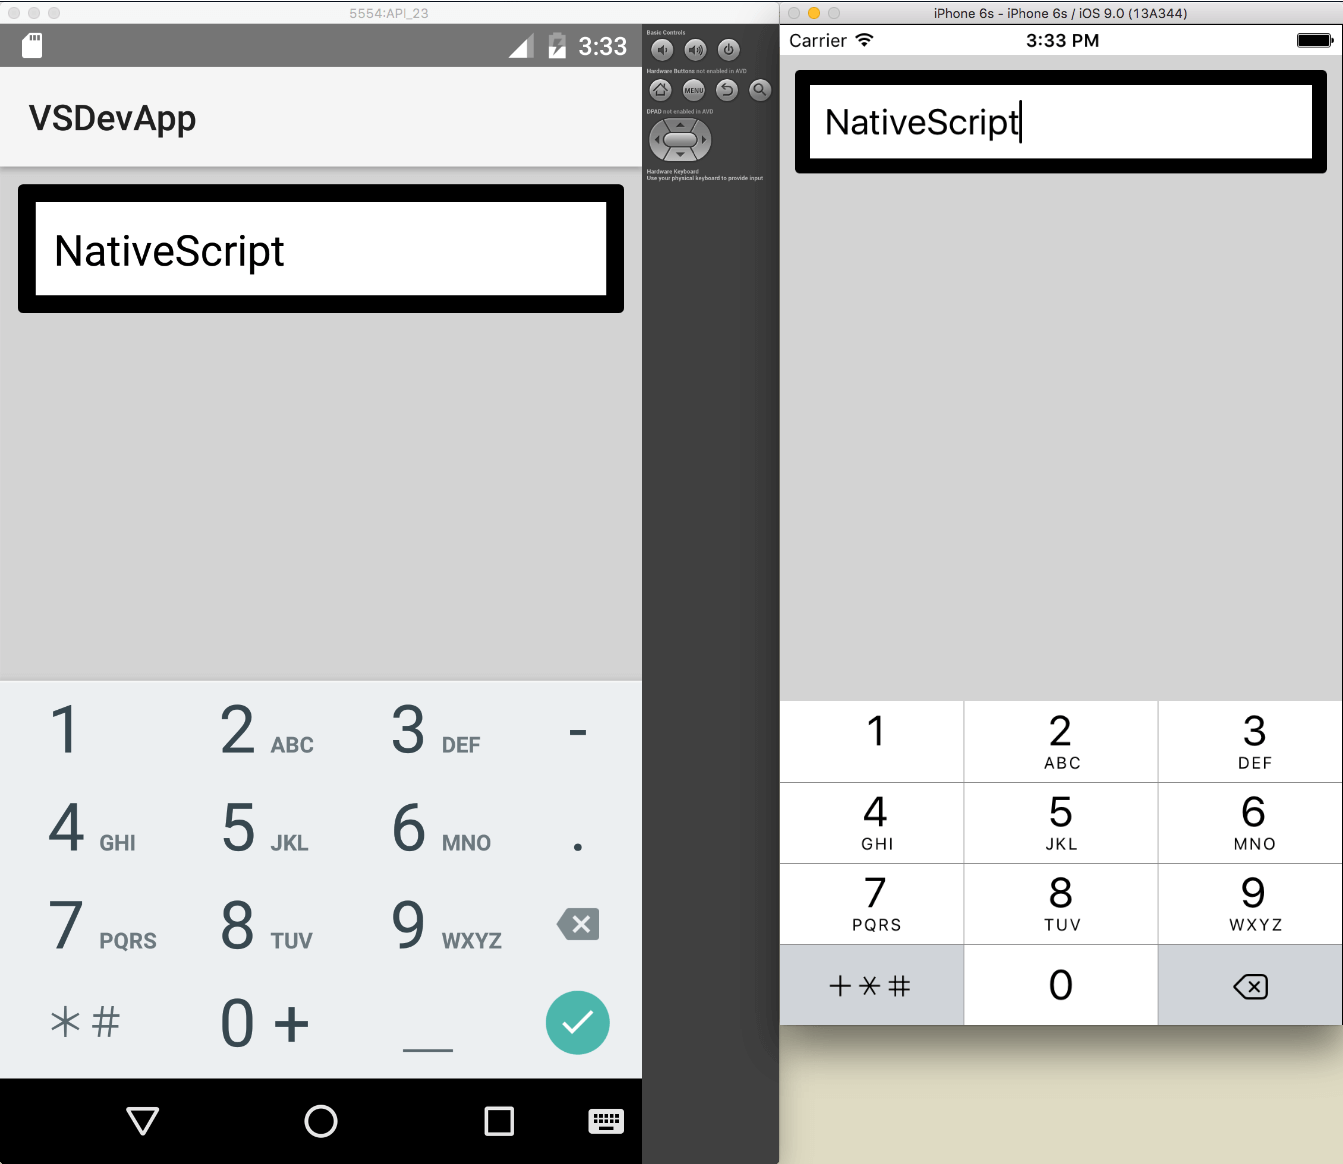 android phone keypad letters in phone mode